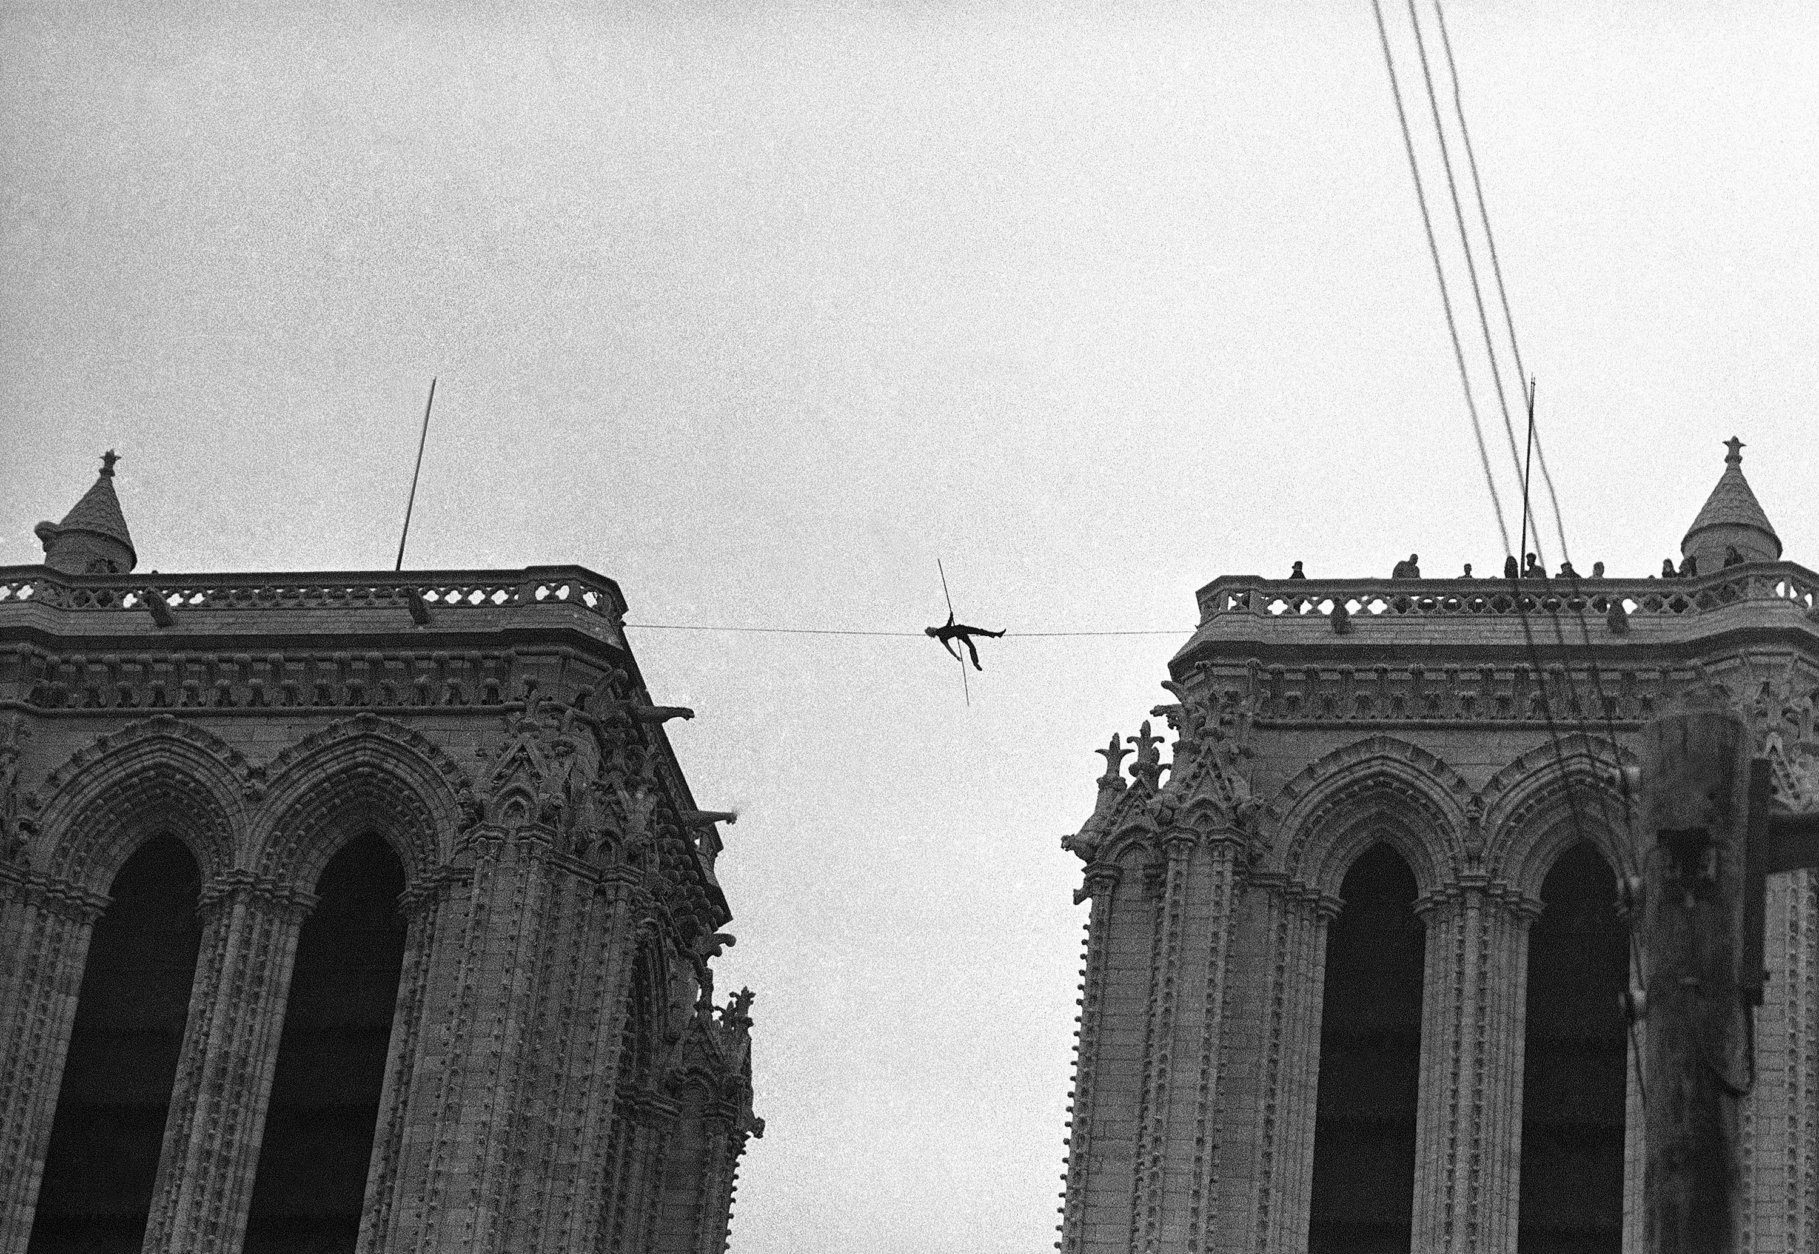 Philippe Petit, a 21-year-old professional tightrope walker, appears as the tiny figure as he lies on a tightrope, strung 225 feet above the ground, between the two towers of Notre Dame Cathedral, Paris, France on June 26, 1971, during a stunt which lasted several hours, with police unable to bring him down. (AP Photo/Str/Cardenas)